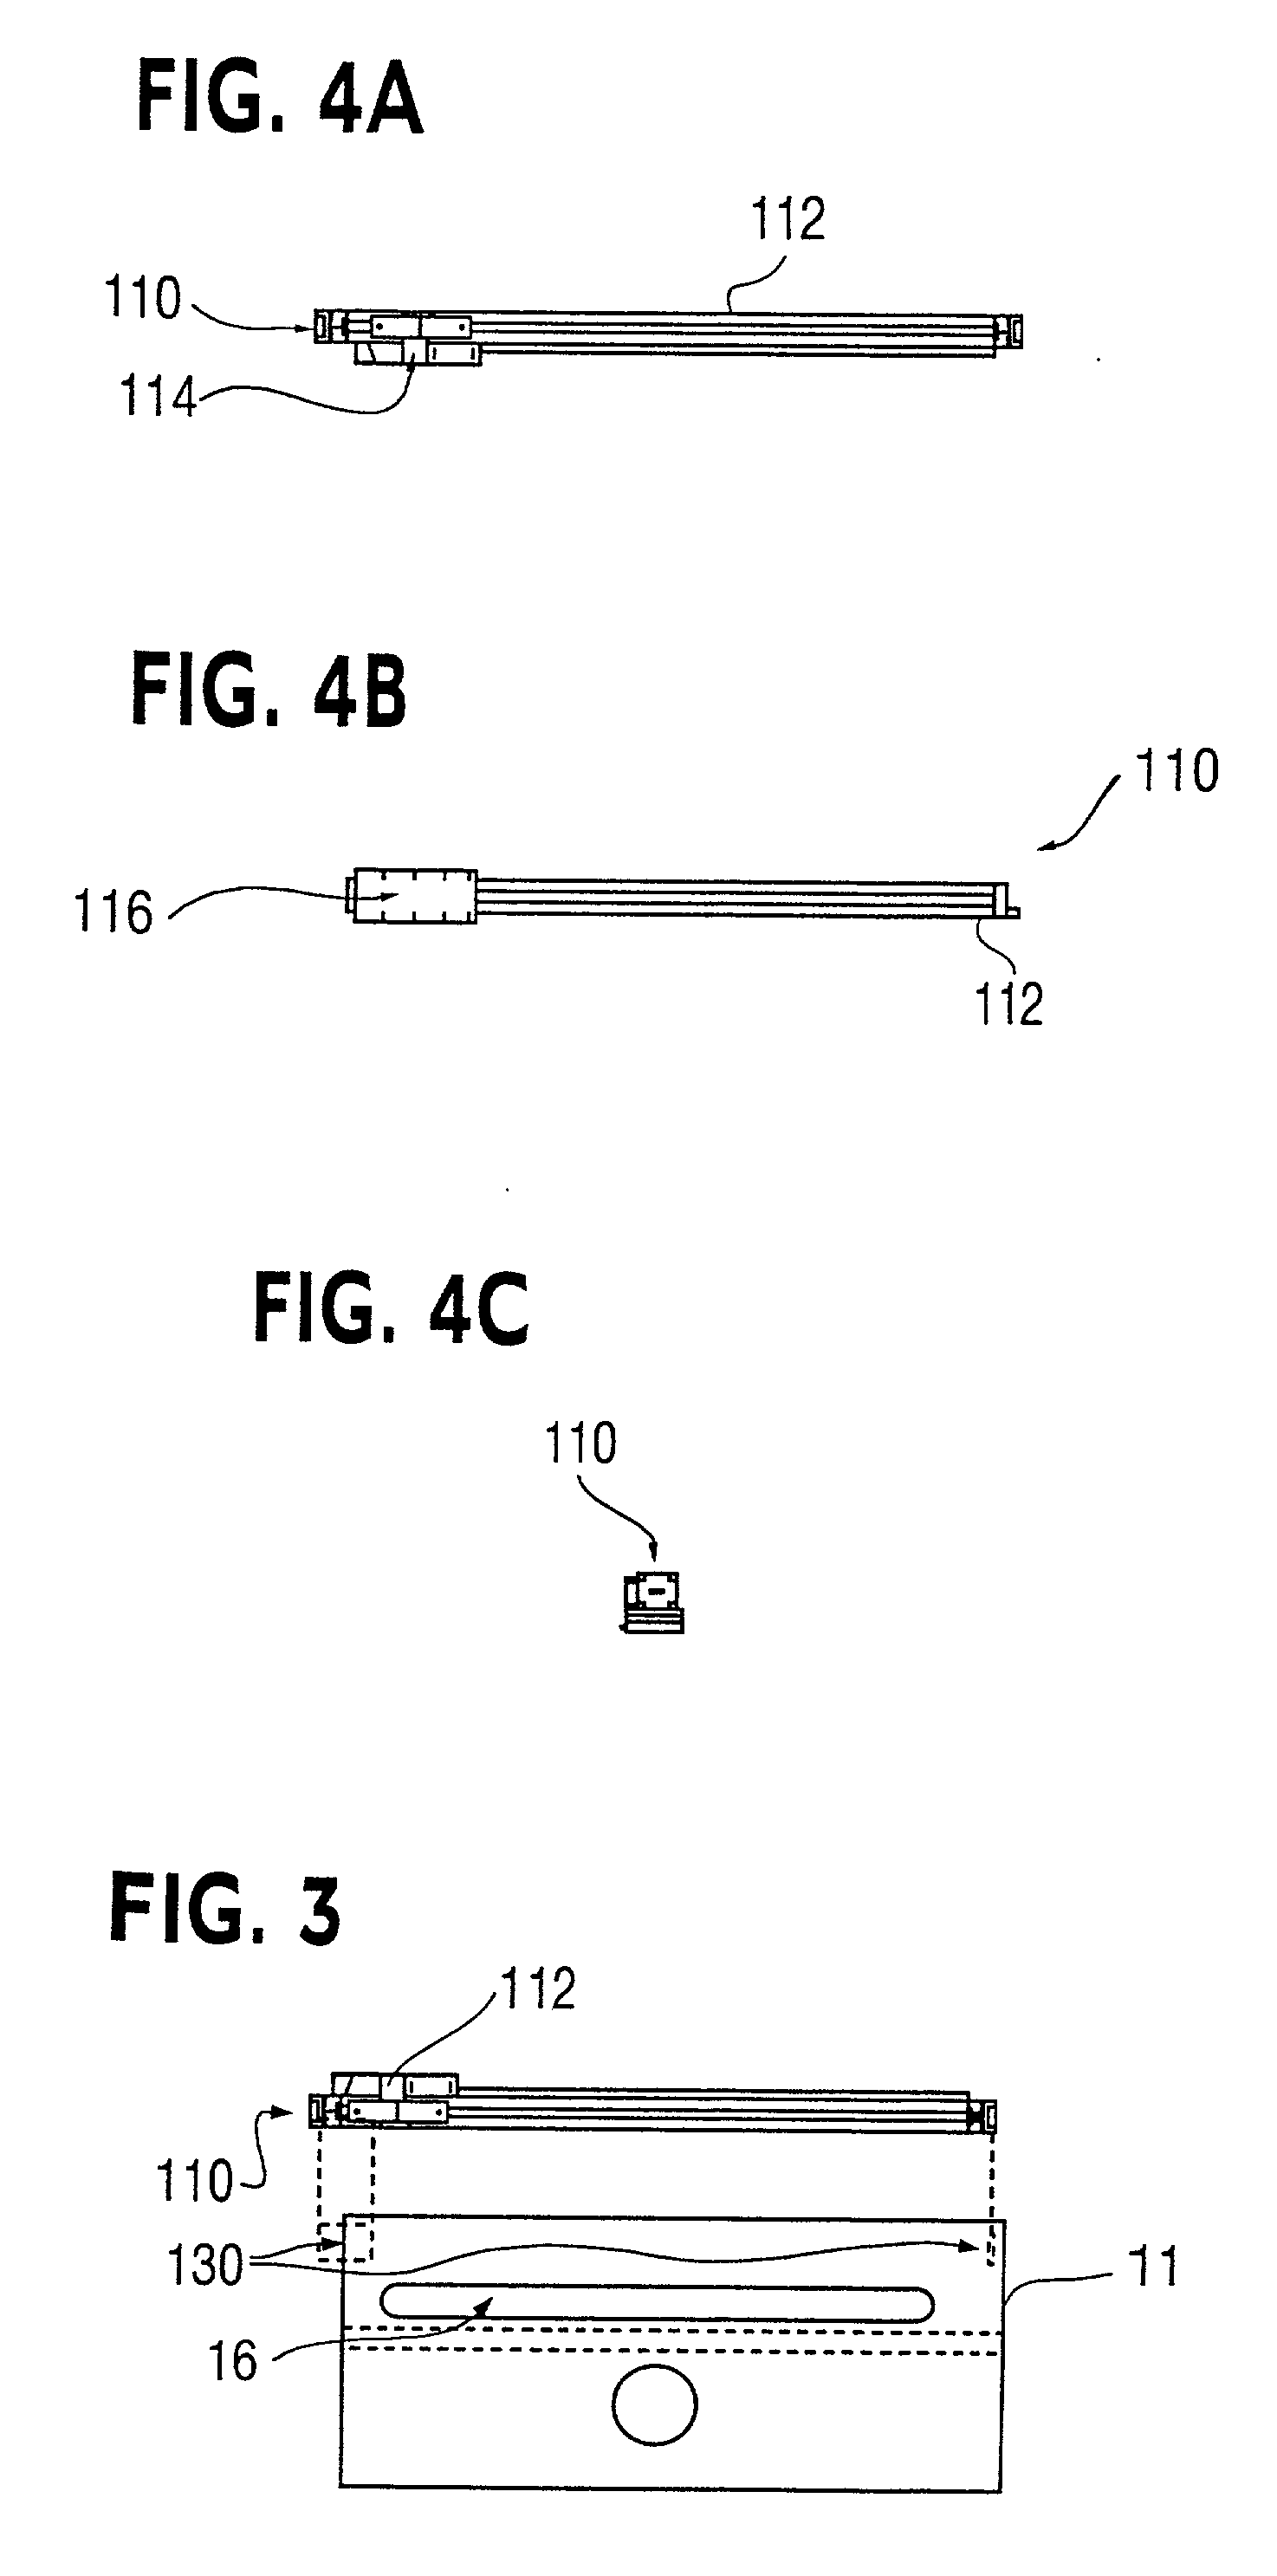 Methods for in-situ cleaning of abrasive belt/planer surfaces using dry ice and cleaning systems and device related thereto